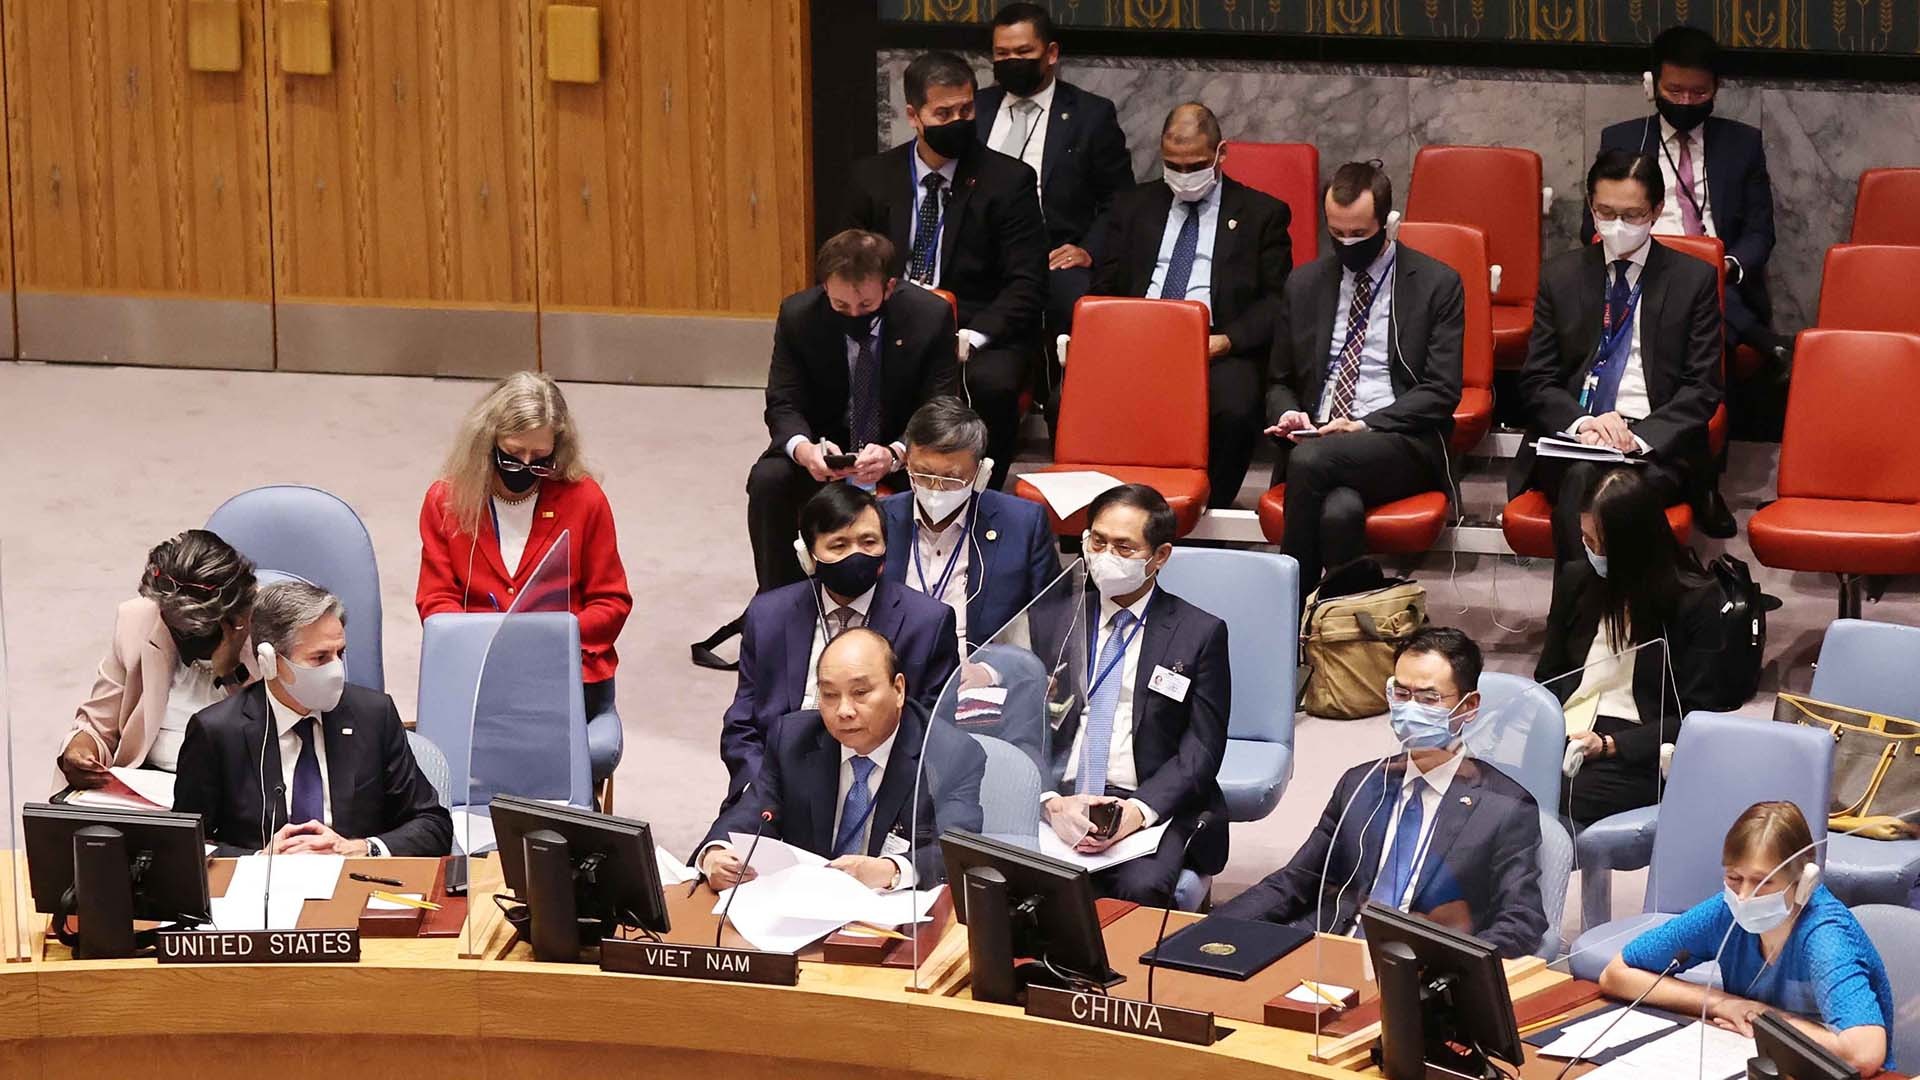 Statement by President Nguyen Xuan Phuc at high-level open debate of UNSC on climate security